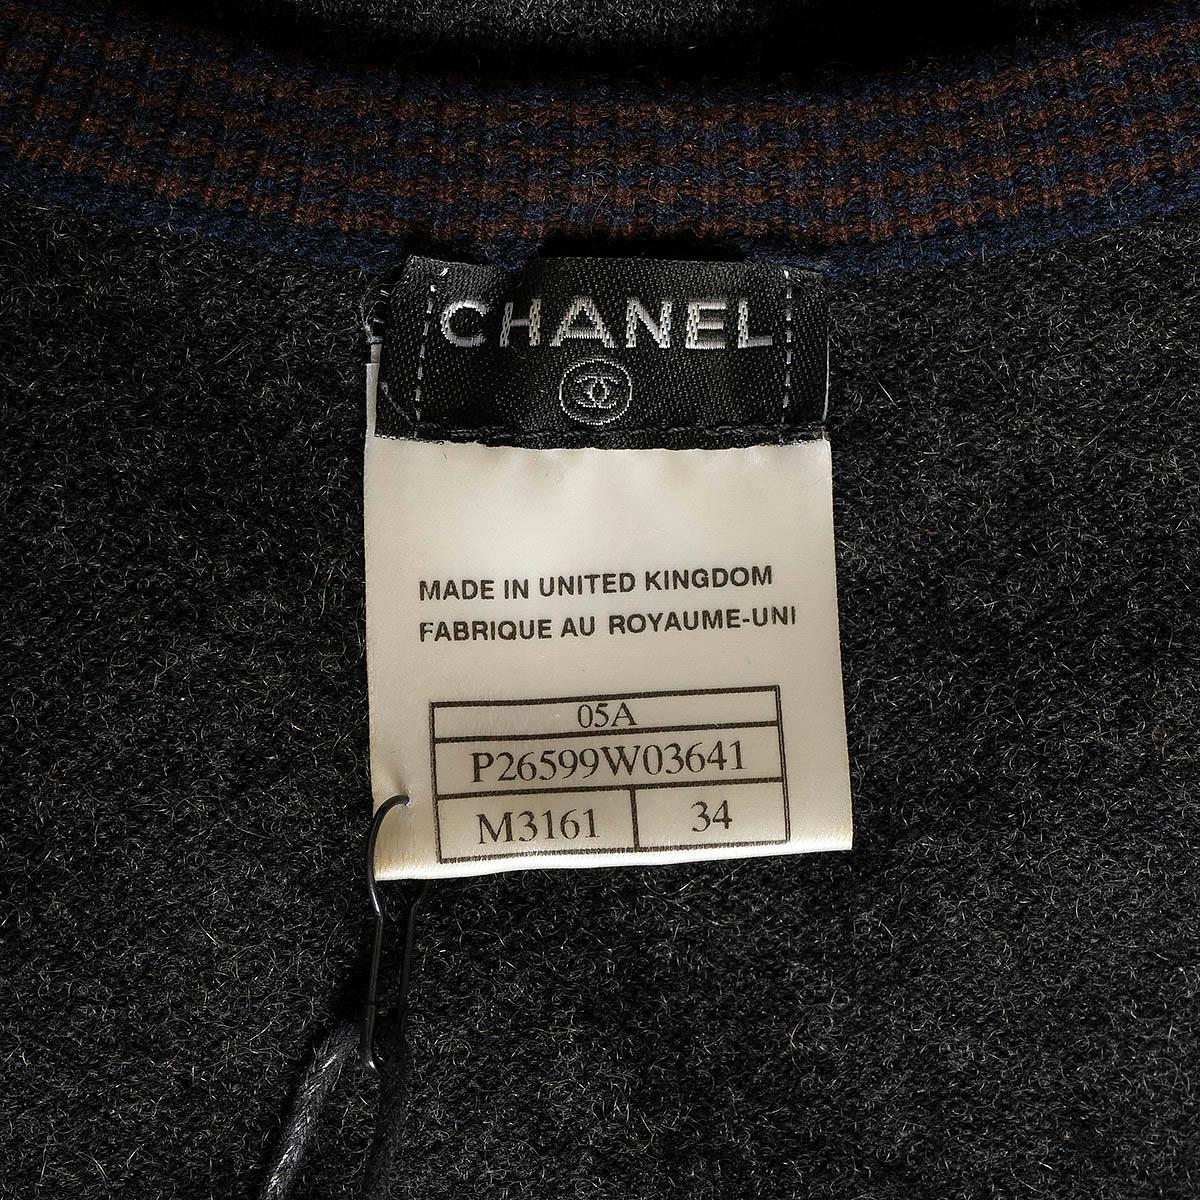 CHANEL grey cashmere 2005 05A CONTRAST TRIM Sleeveless Sweater 34 XS For Sale 4